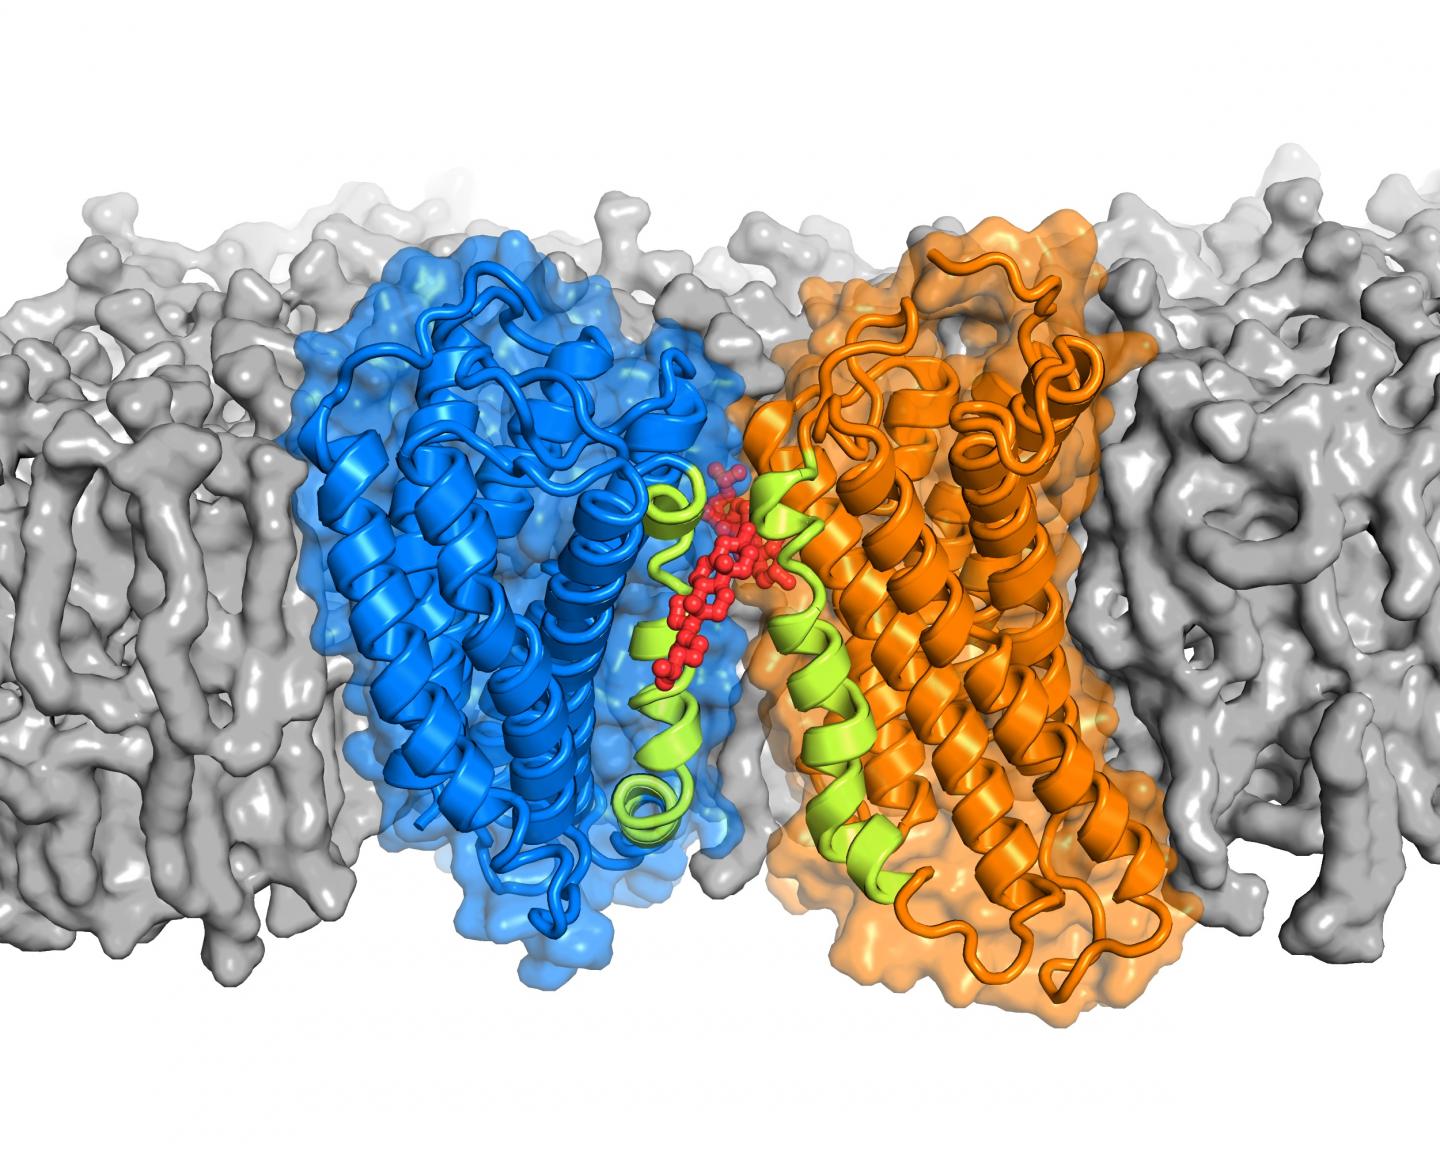 Cholesterol May Help Proteins Pair Up to Transmit Signals Across Cell Membranes